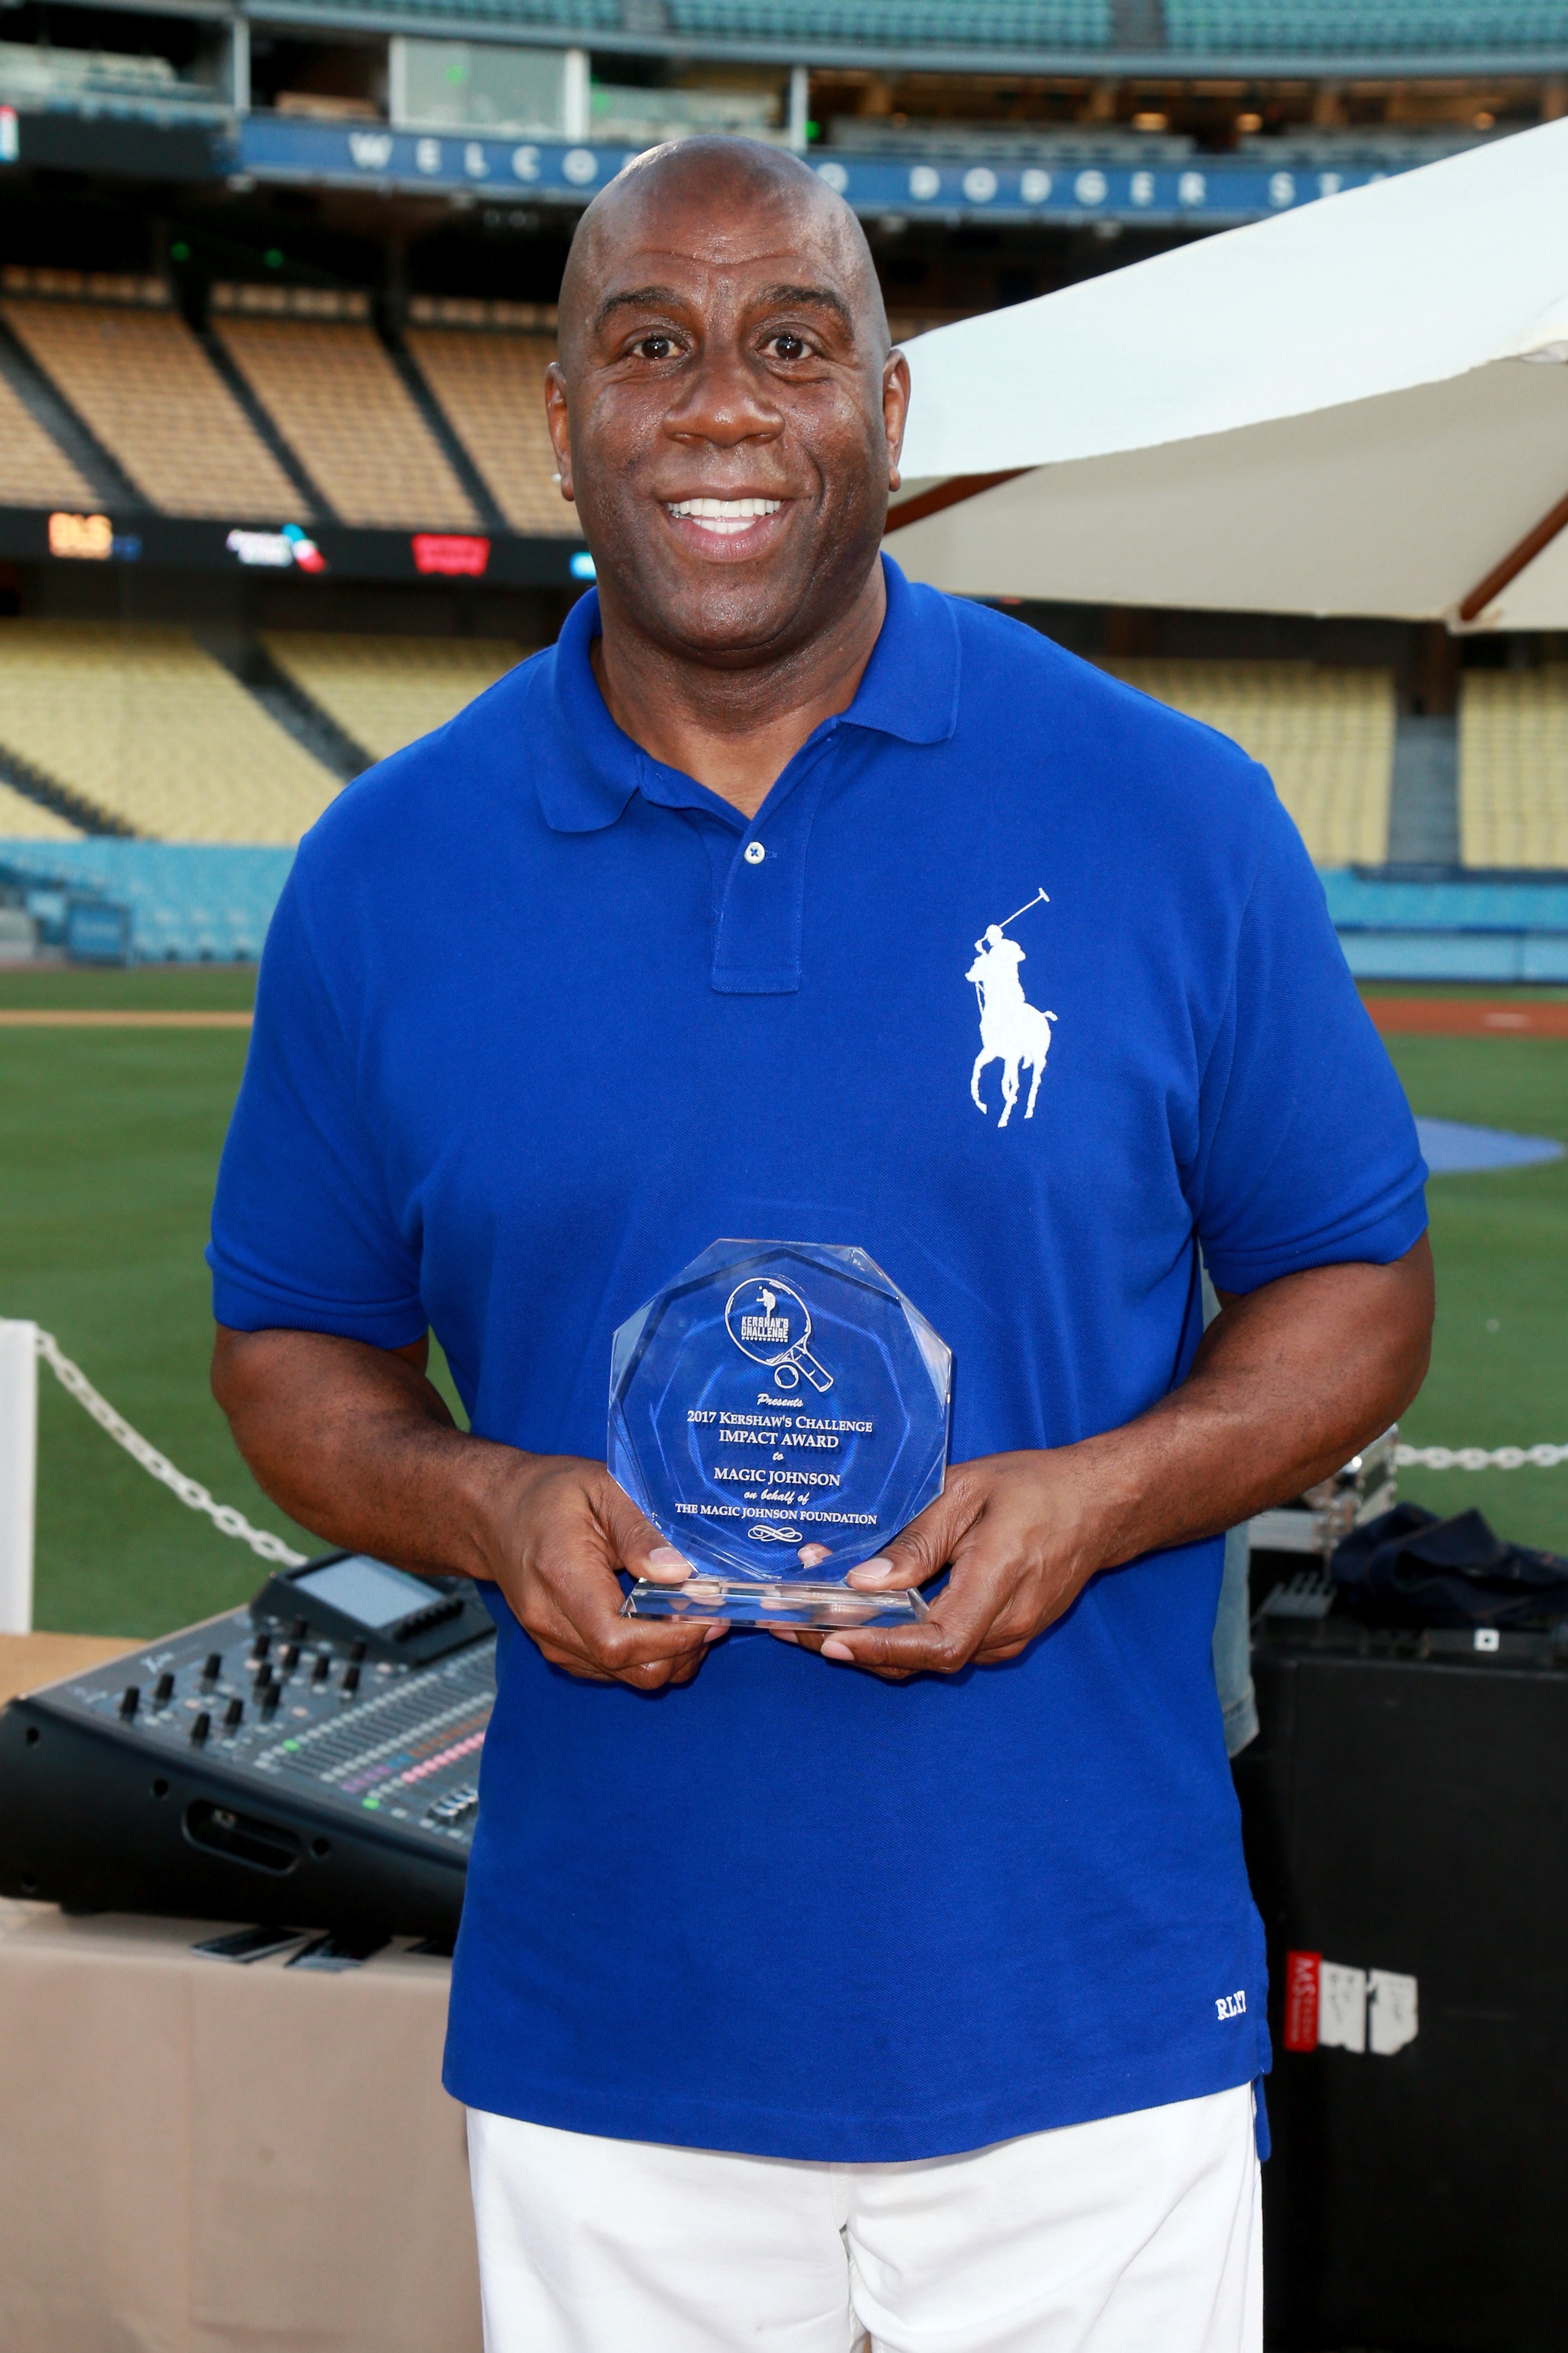 Earvin Magic Johnson receives the 2017 Kershaw's Impact Award at the Dodger Stadium in Los Angeles | Photo: Getty Images